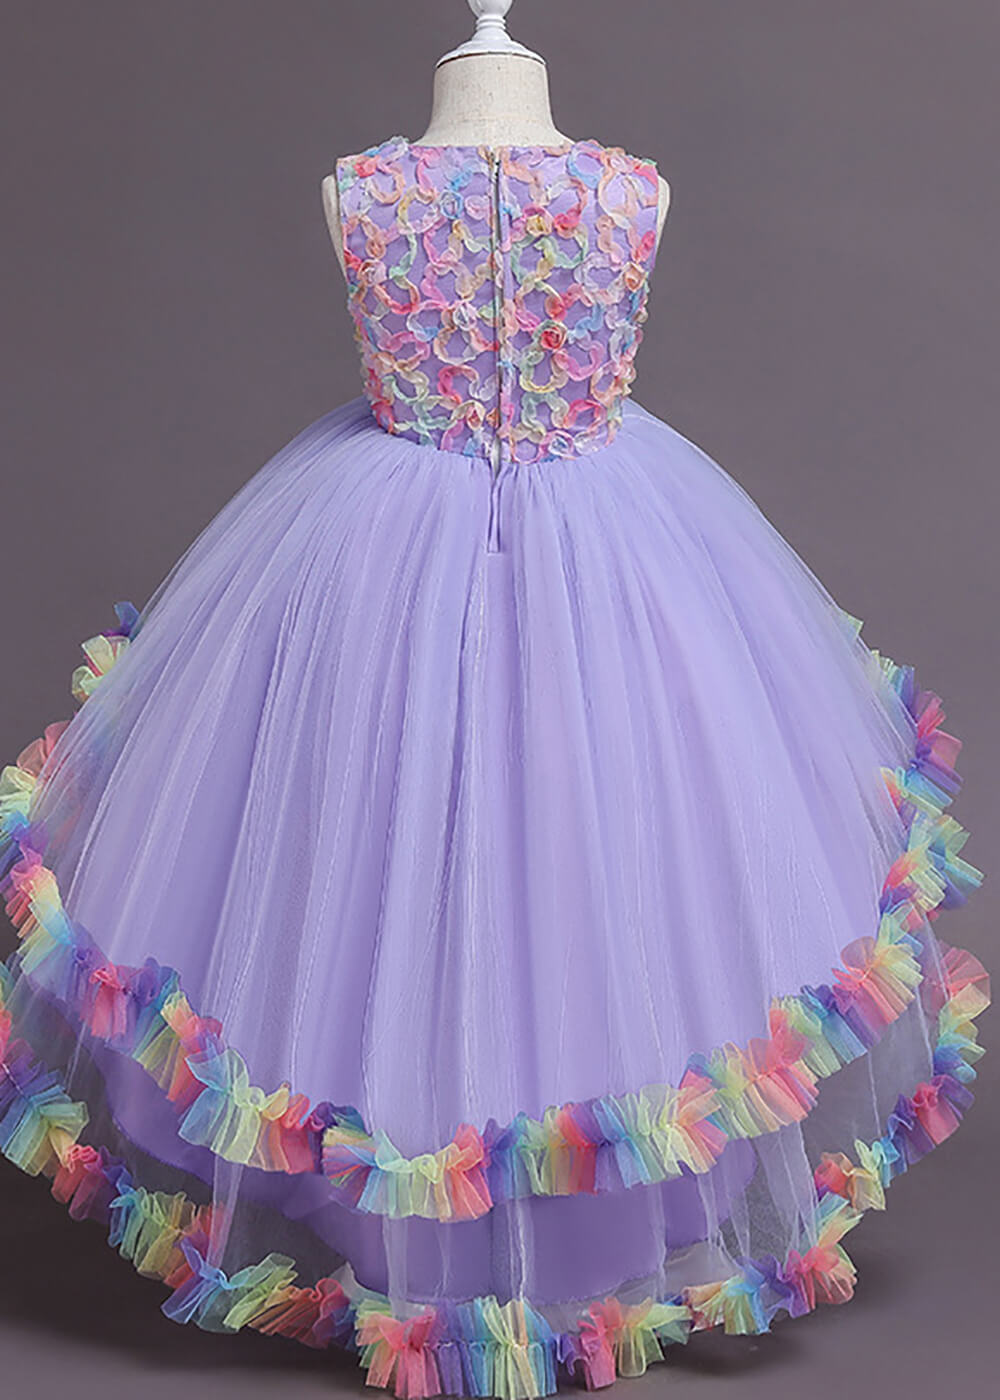 Colorful Edge Tulle High Low A-line Sleeveless Flower Girl Dress